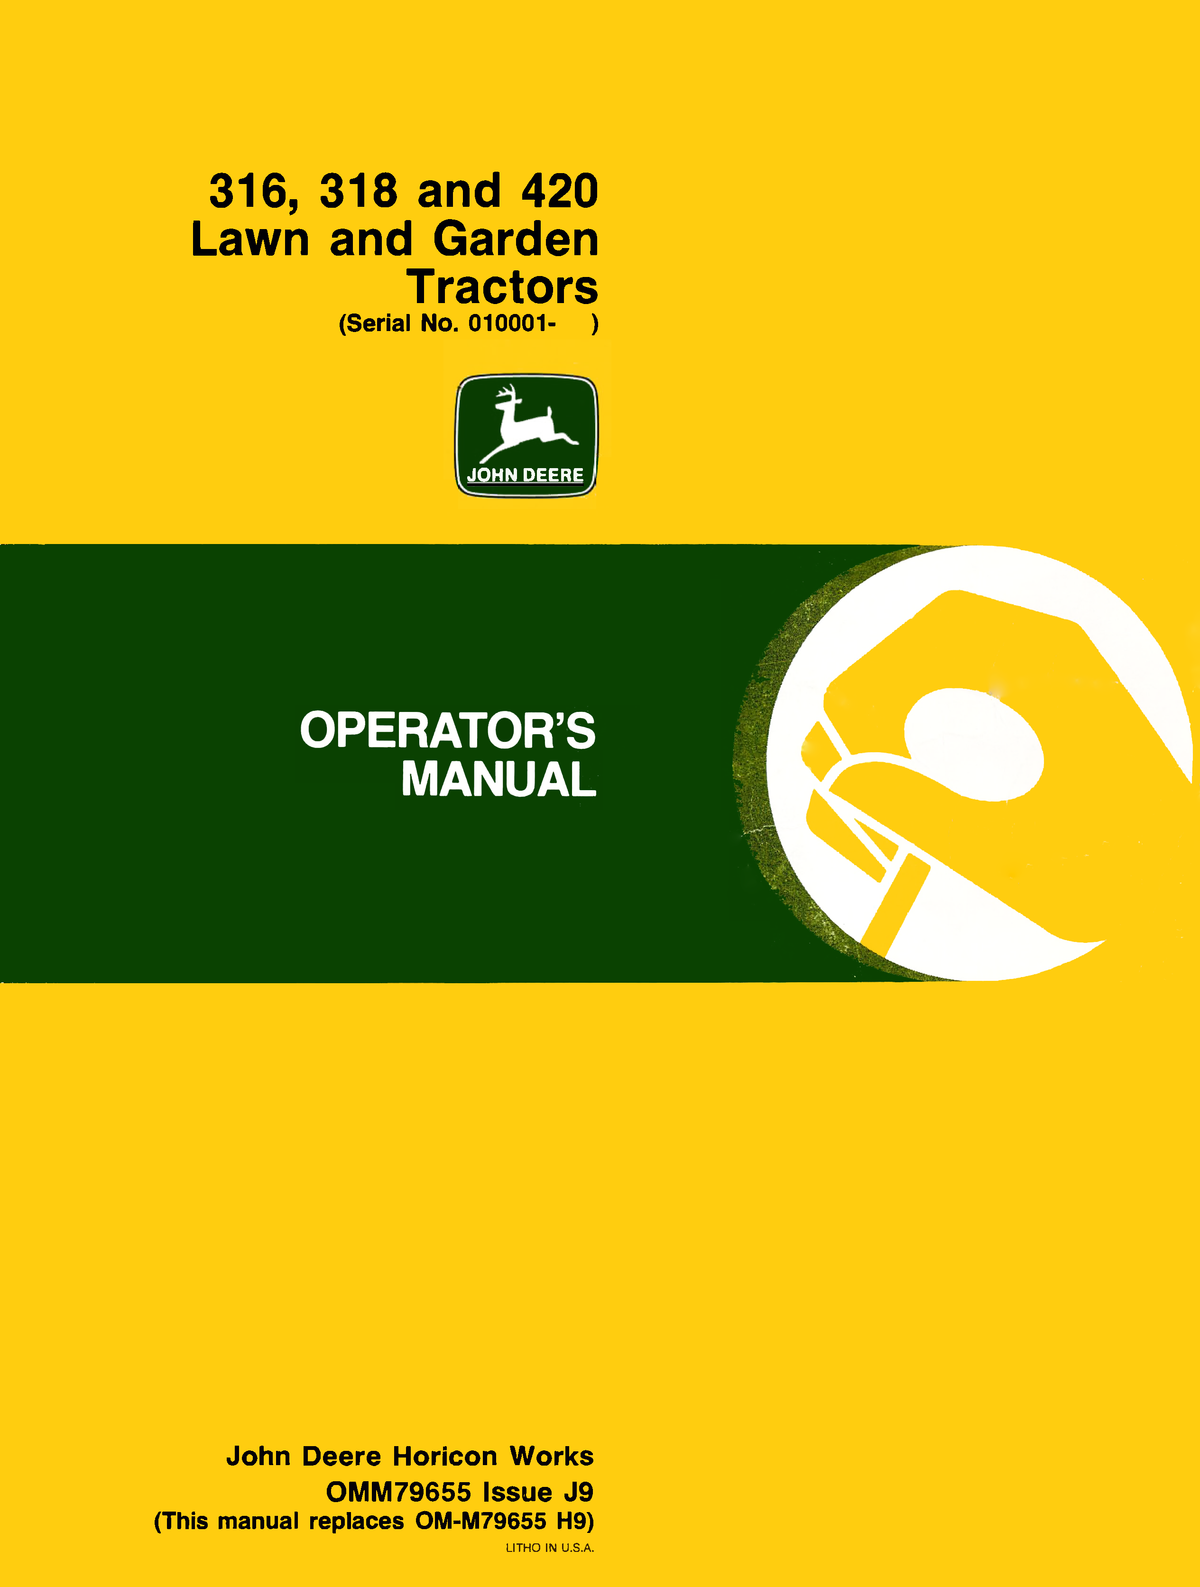 John Deere 316, 318 and 420 Lawn and Garden Tractors Operator's Manual